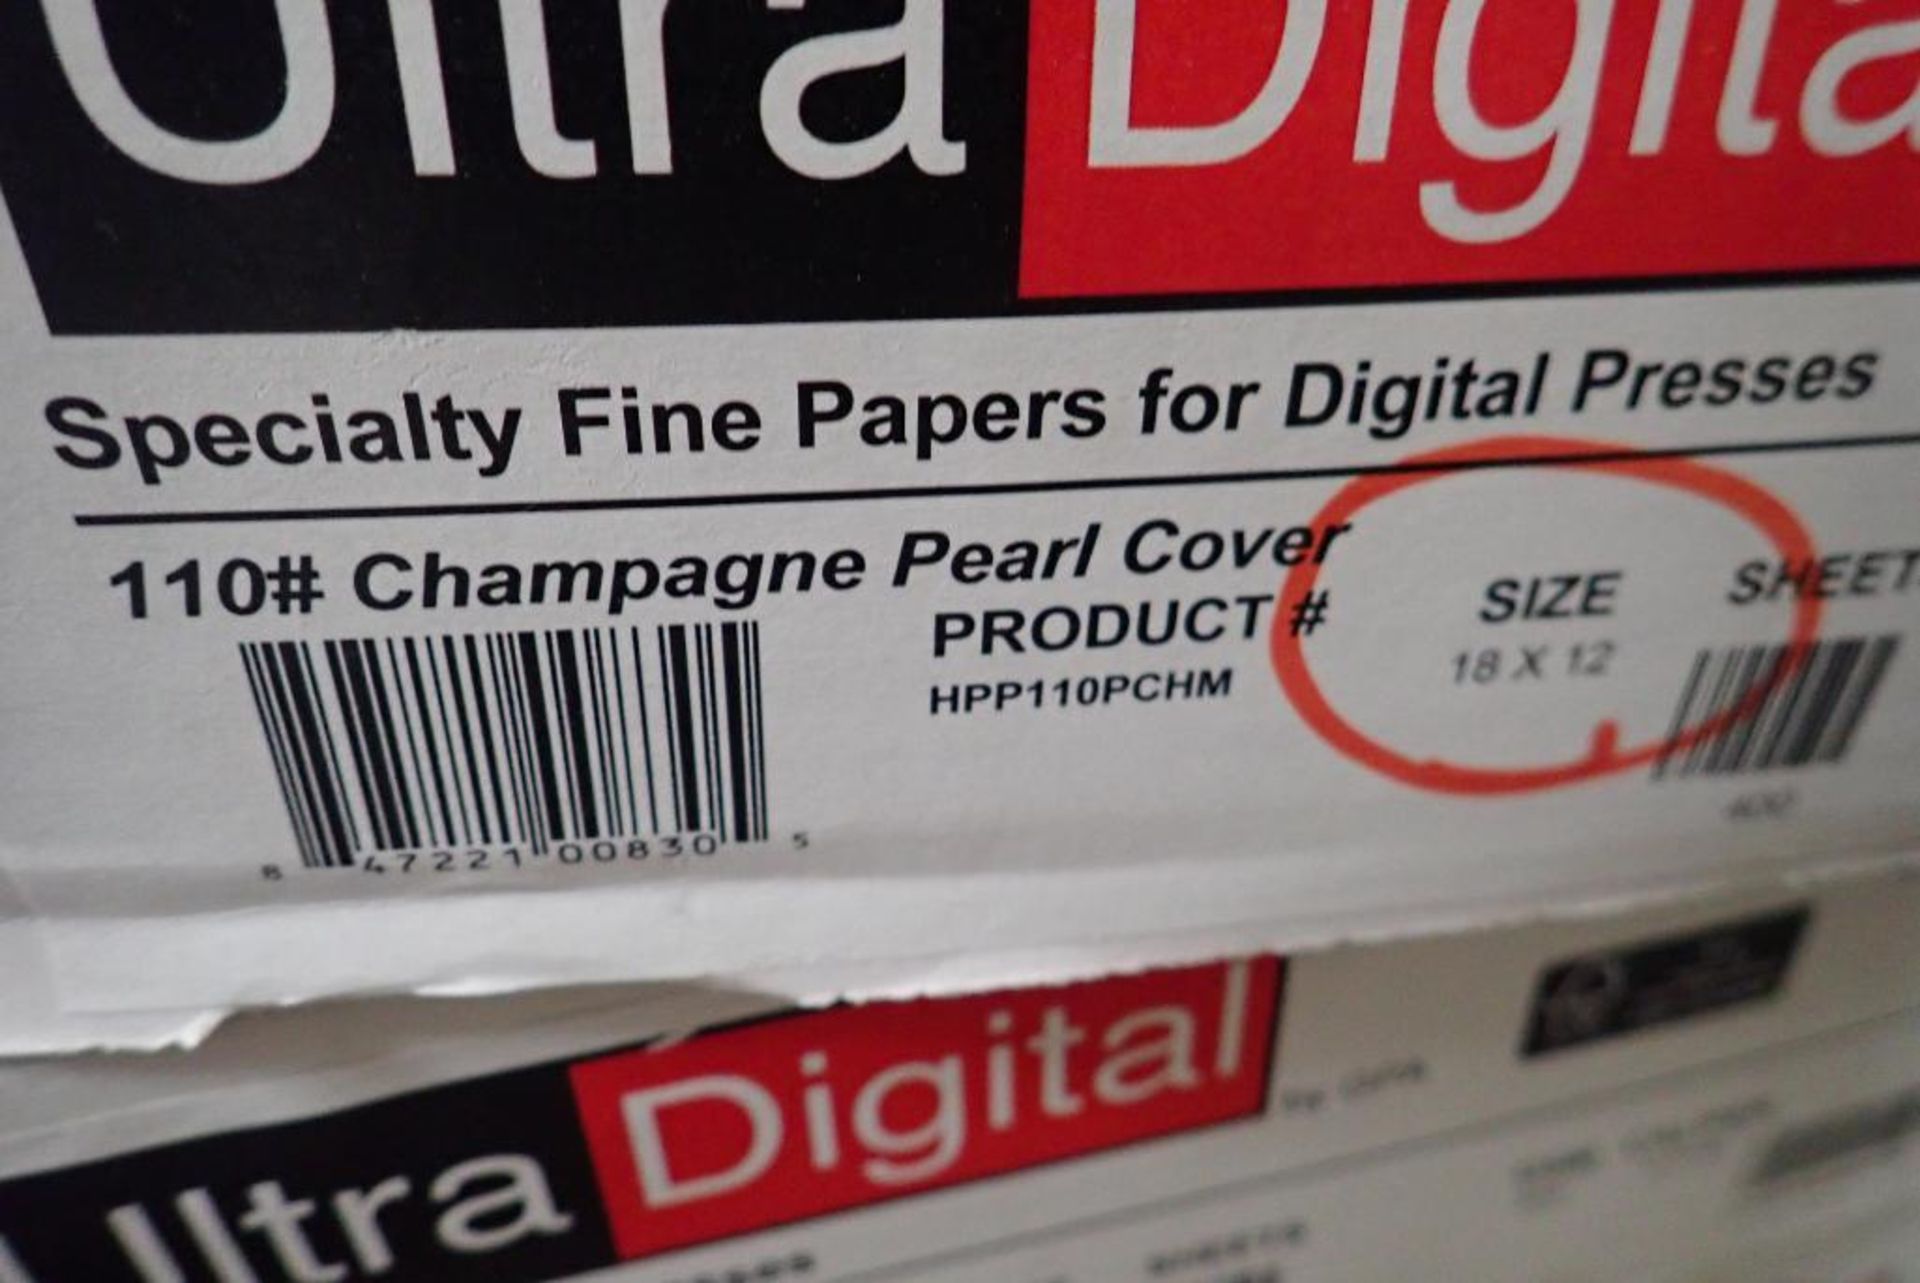 Lot of Approx. (12) Cases Asst. Size Ultra Digital Specialty Paper for Digital Presses. - Image 11 of 13